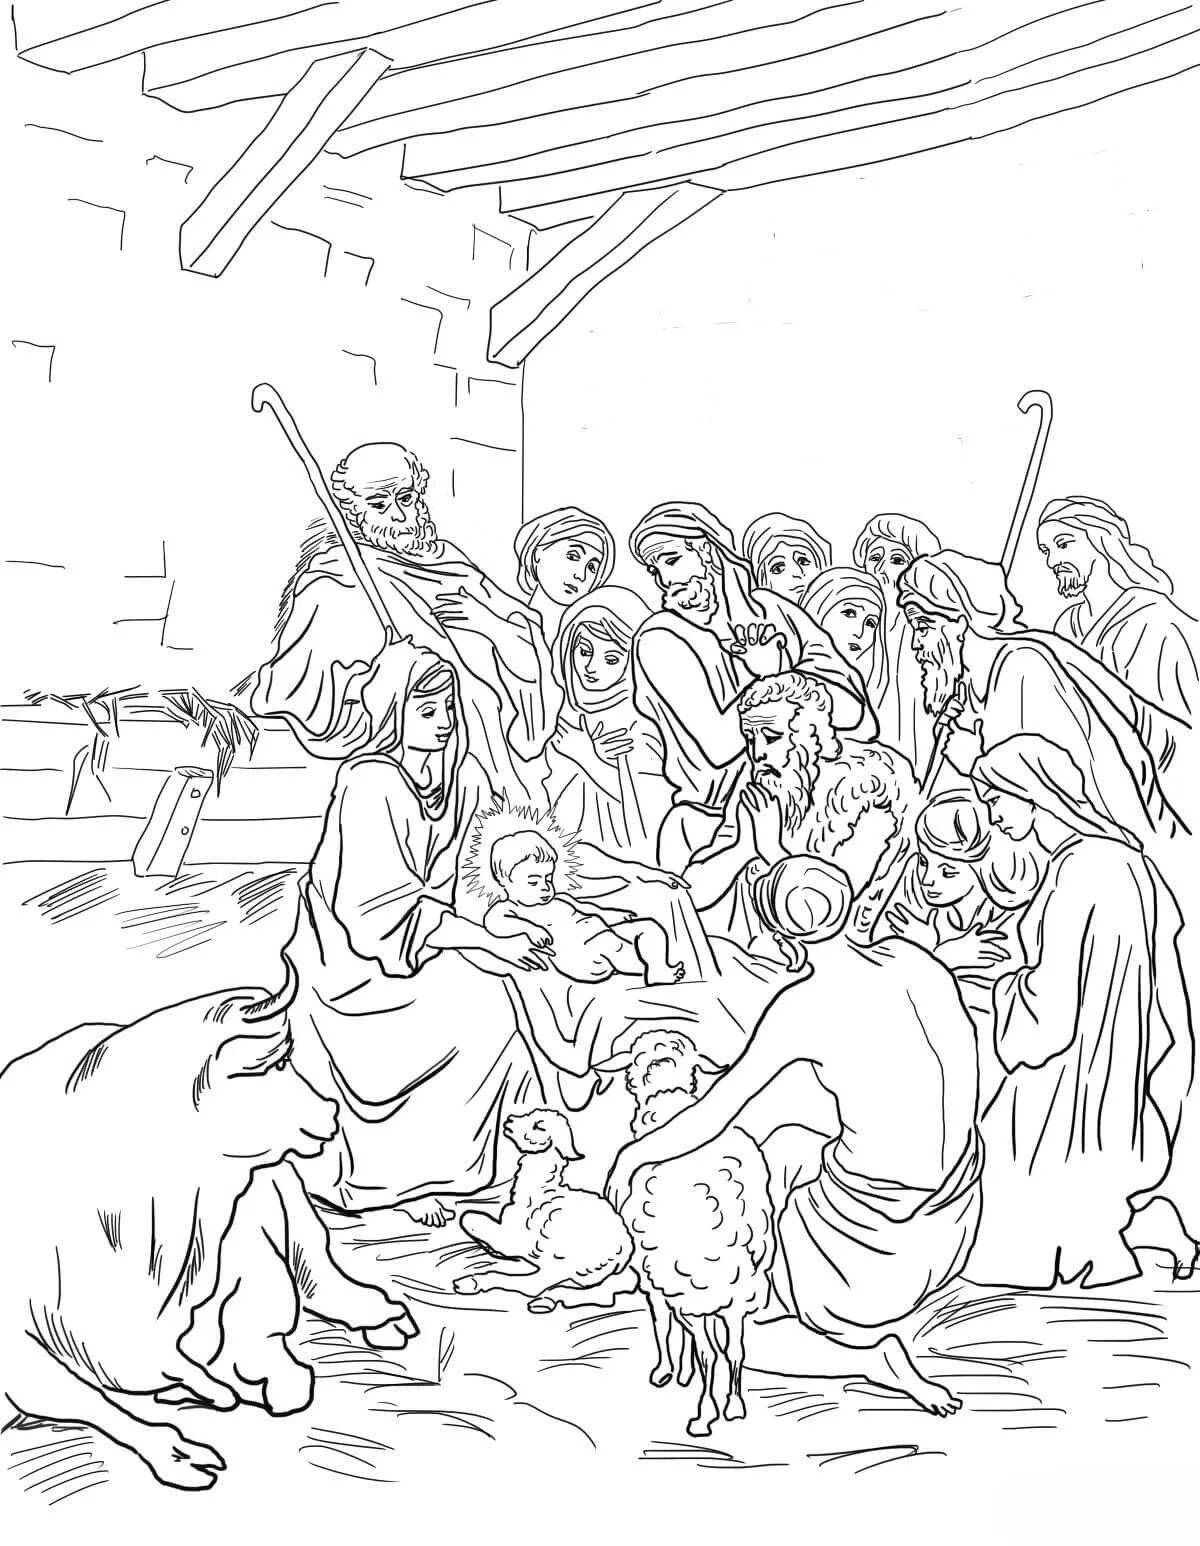 Coloring page glowing shepherds for christmas